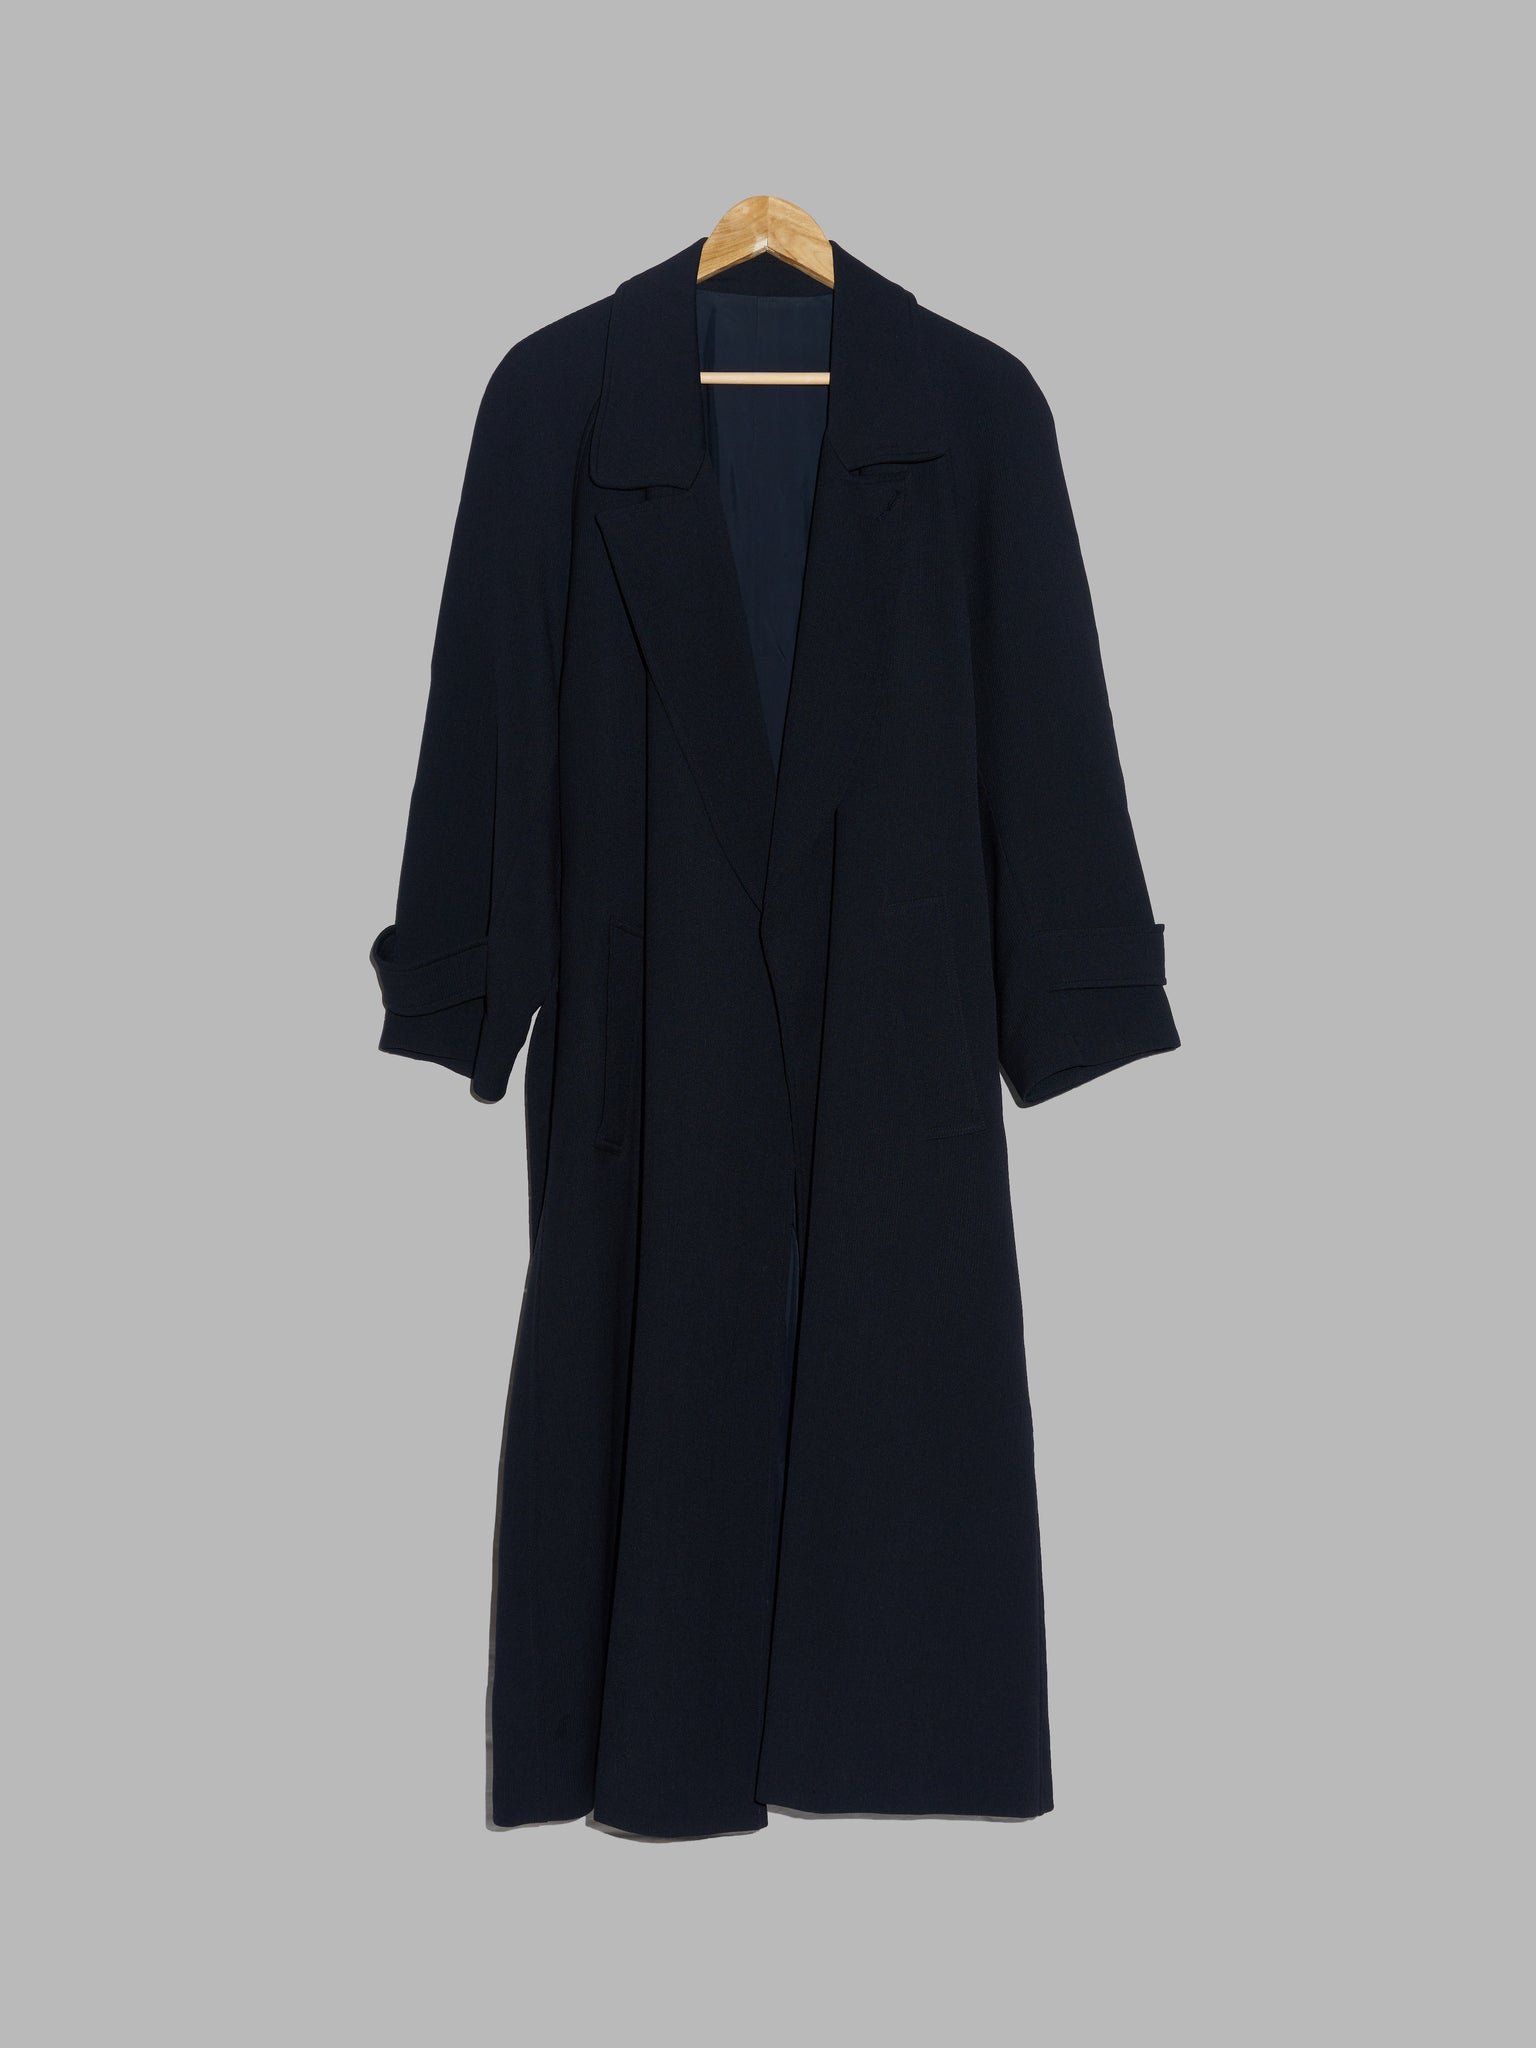 Kenzo Paris 1980s black wool belted collar button open trench coat - size 2 M